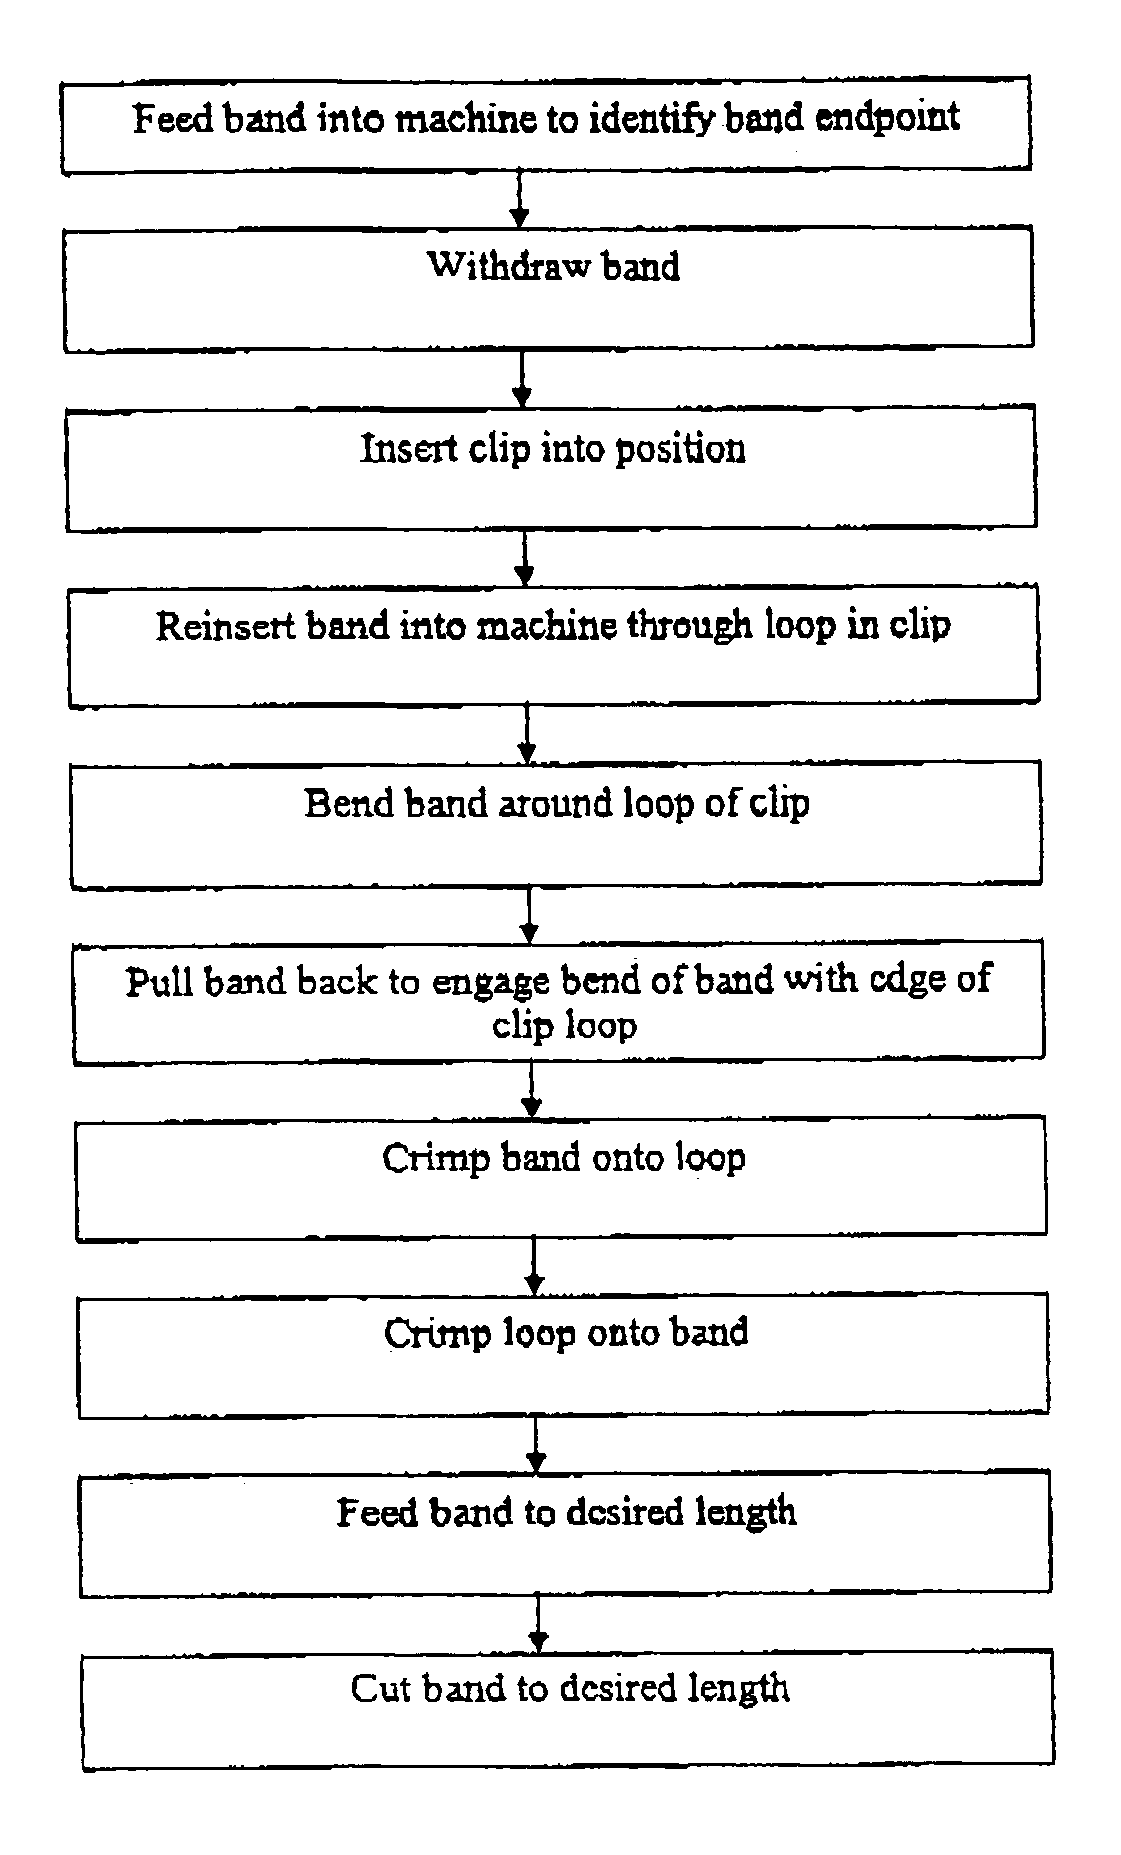 Method of manufacturing a band with a fastener